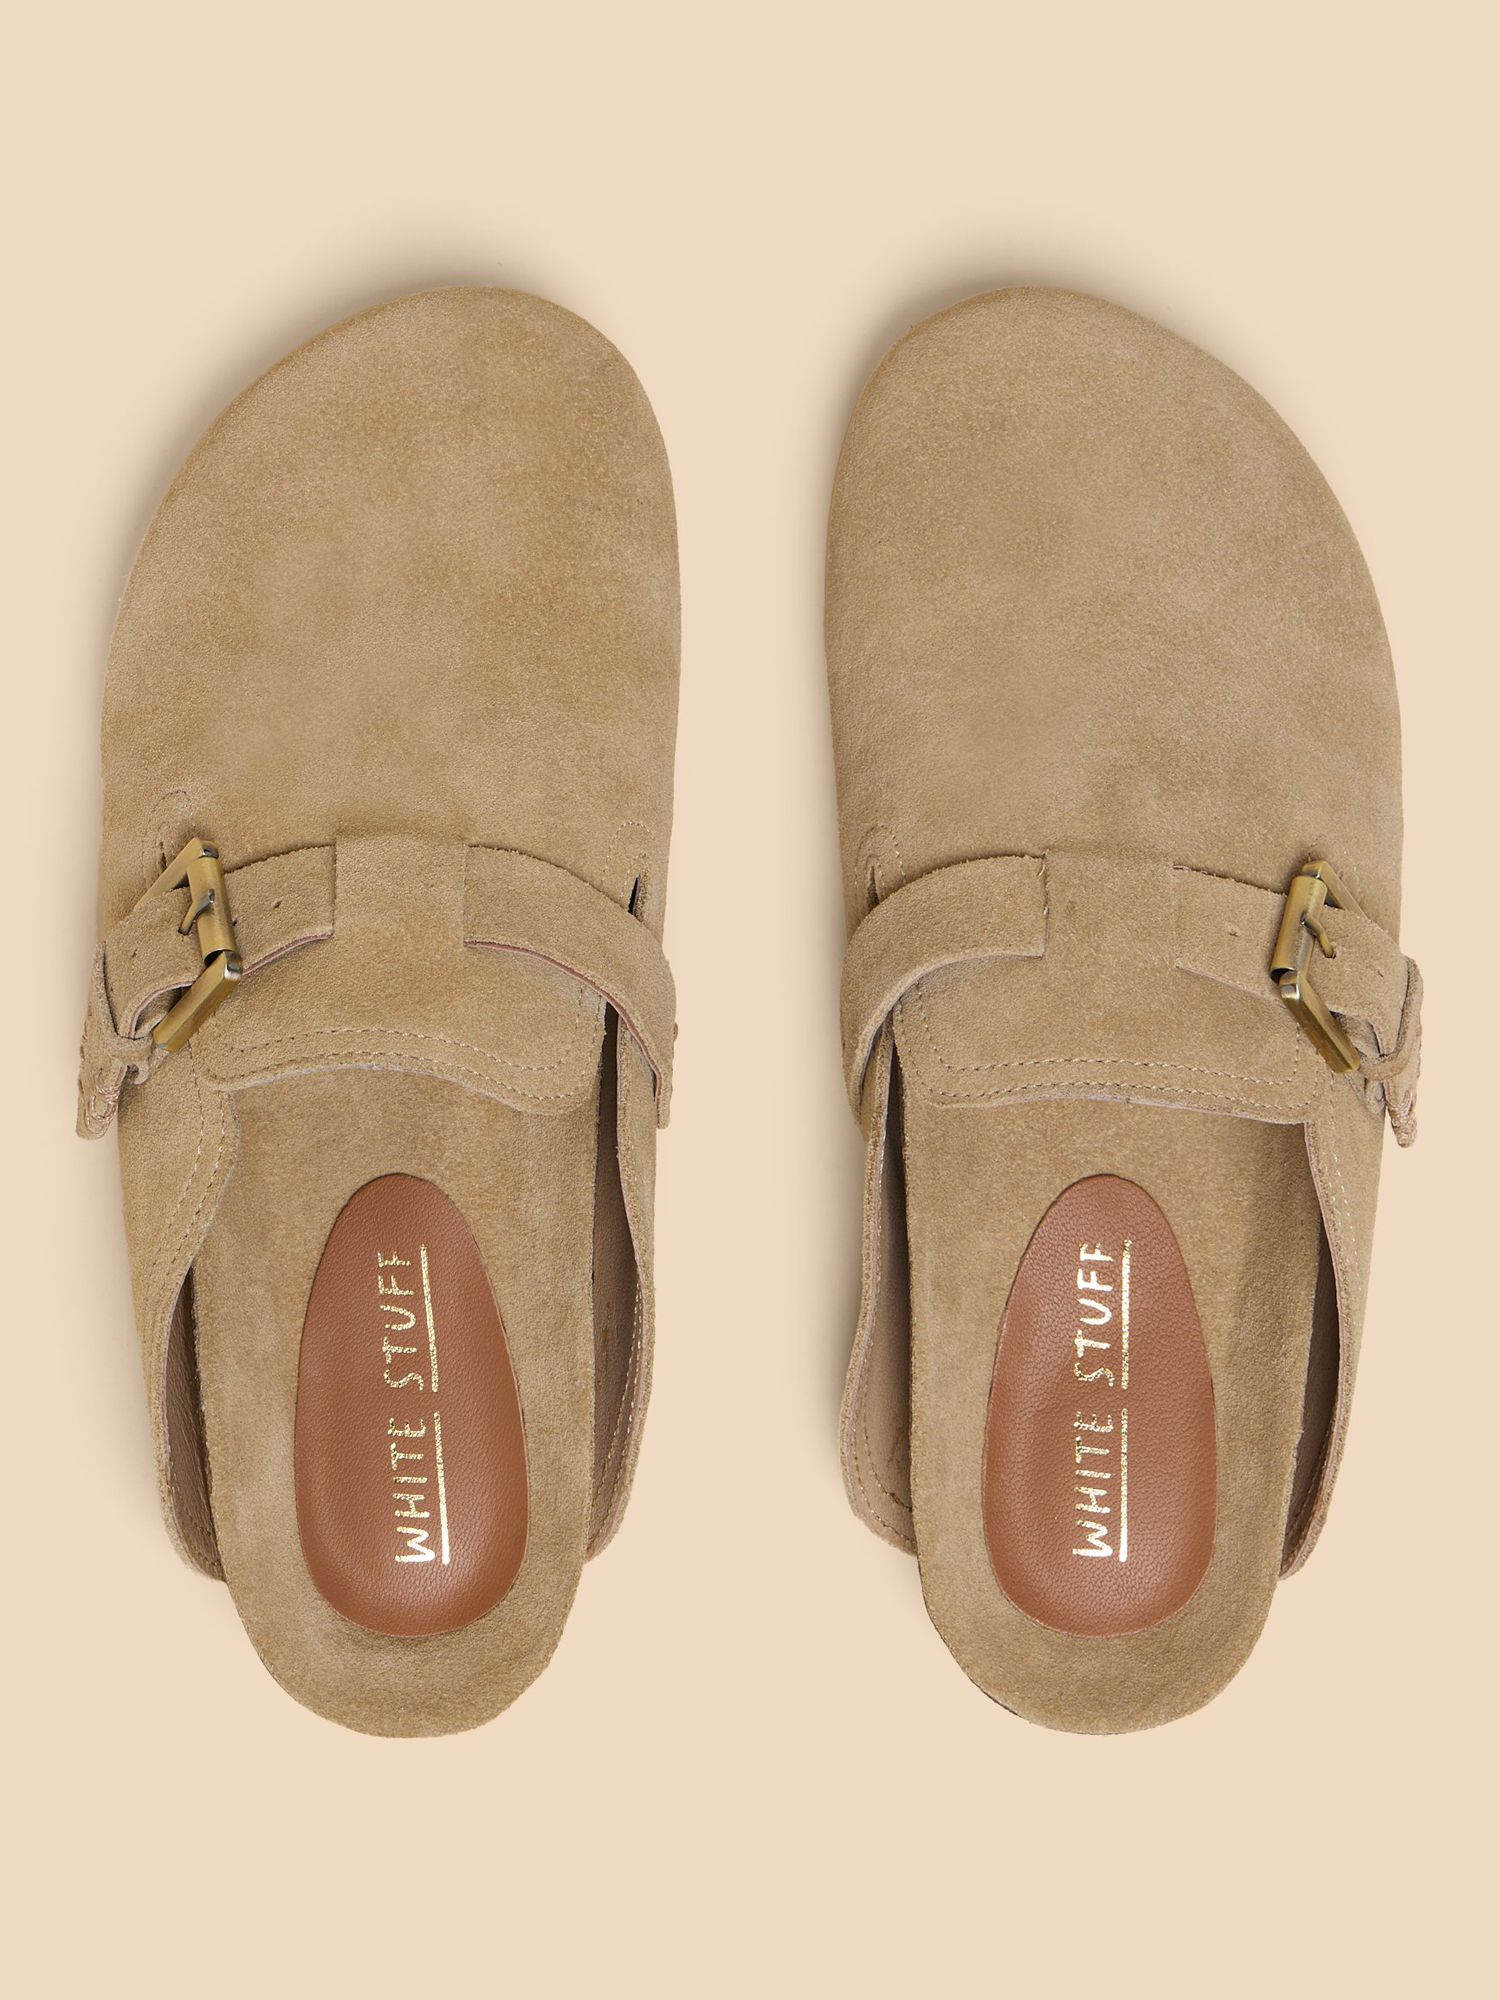 Buy White Stuff Suede Slip On Mules, Natural Online at johnlewis.com